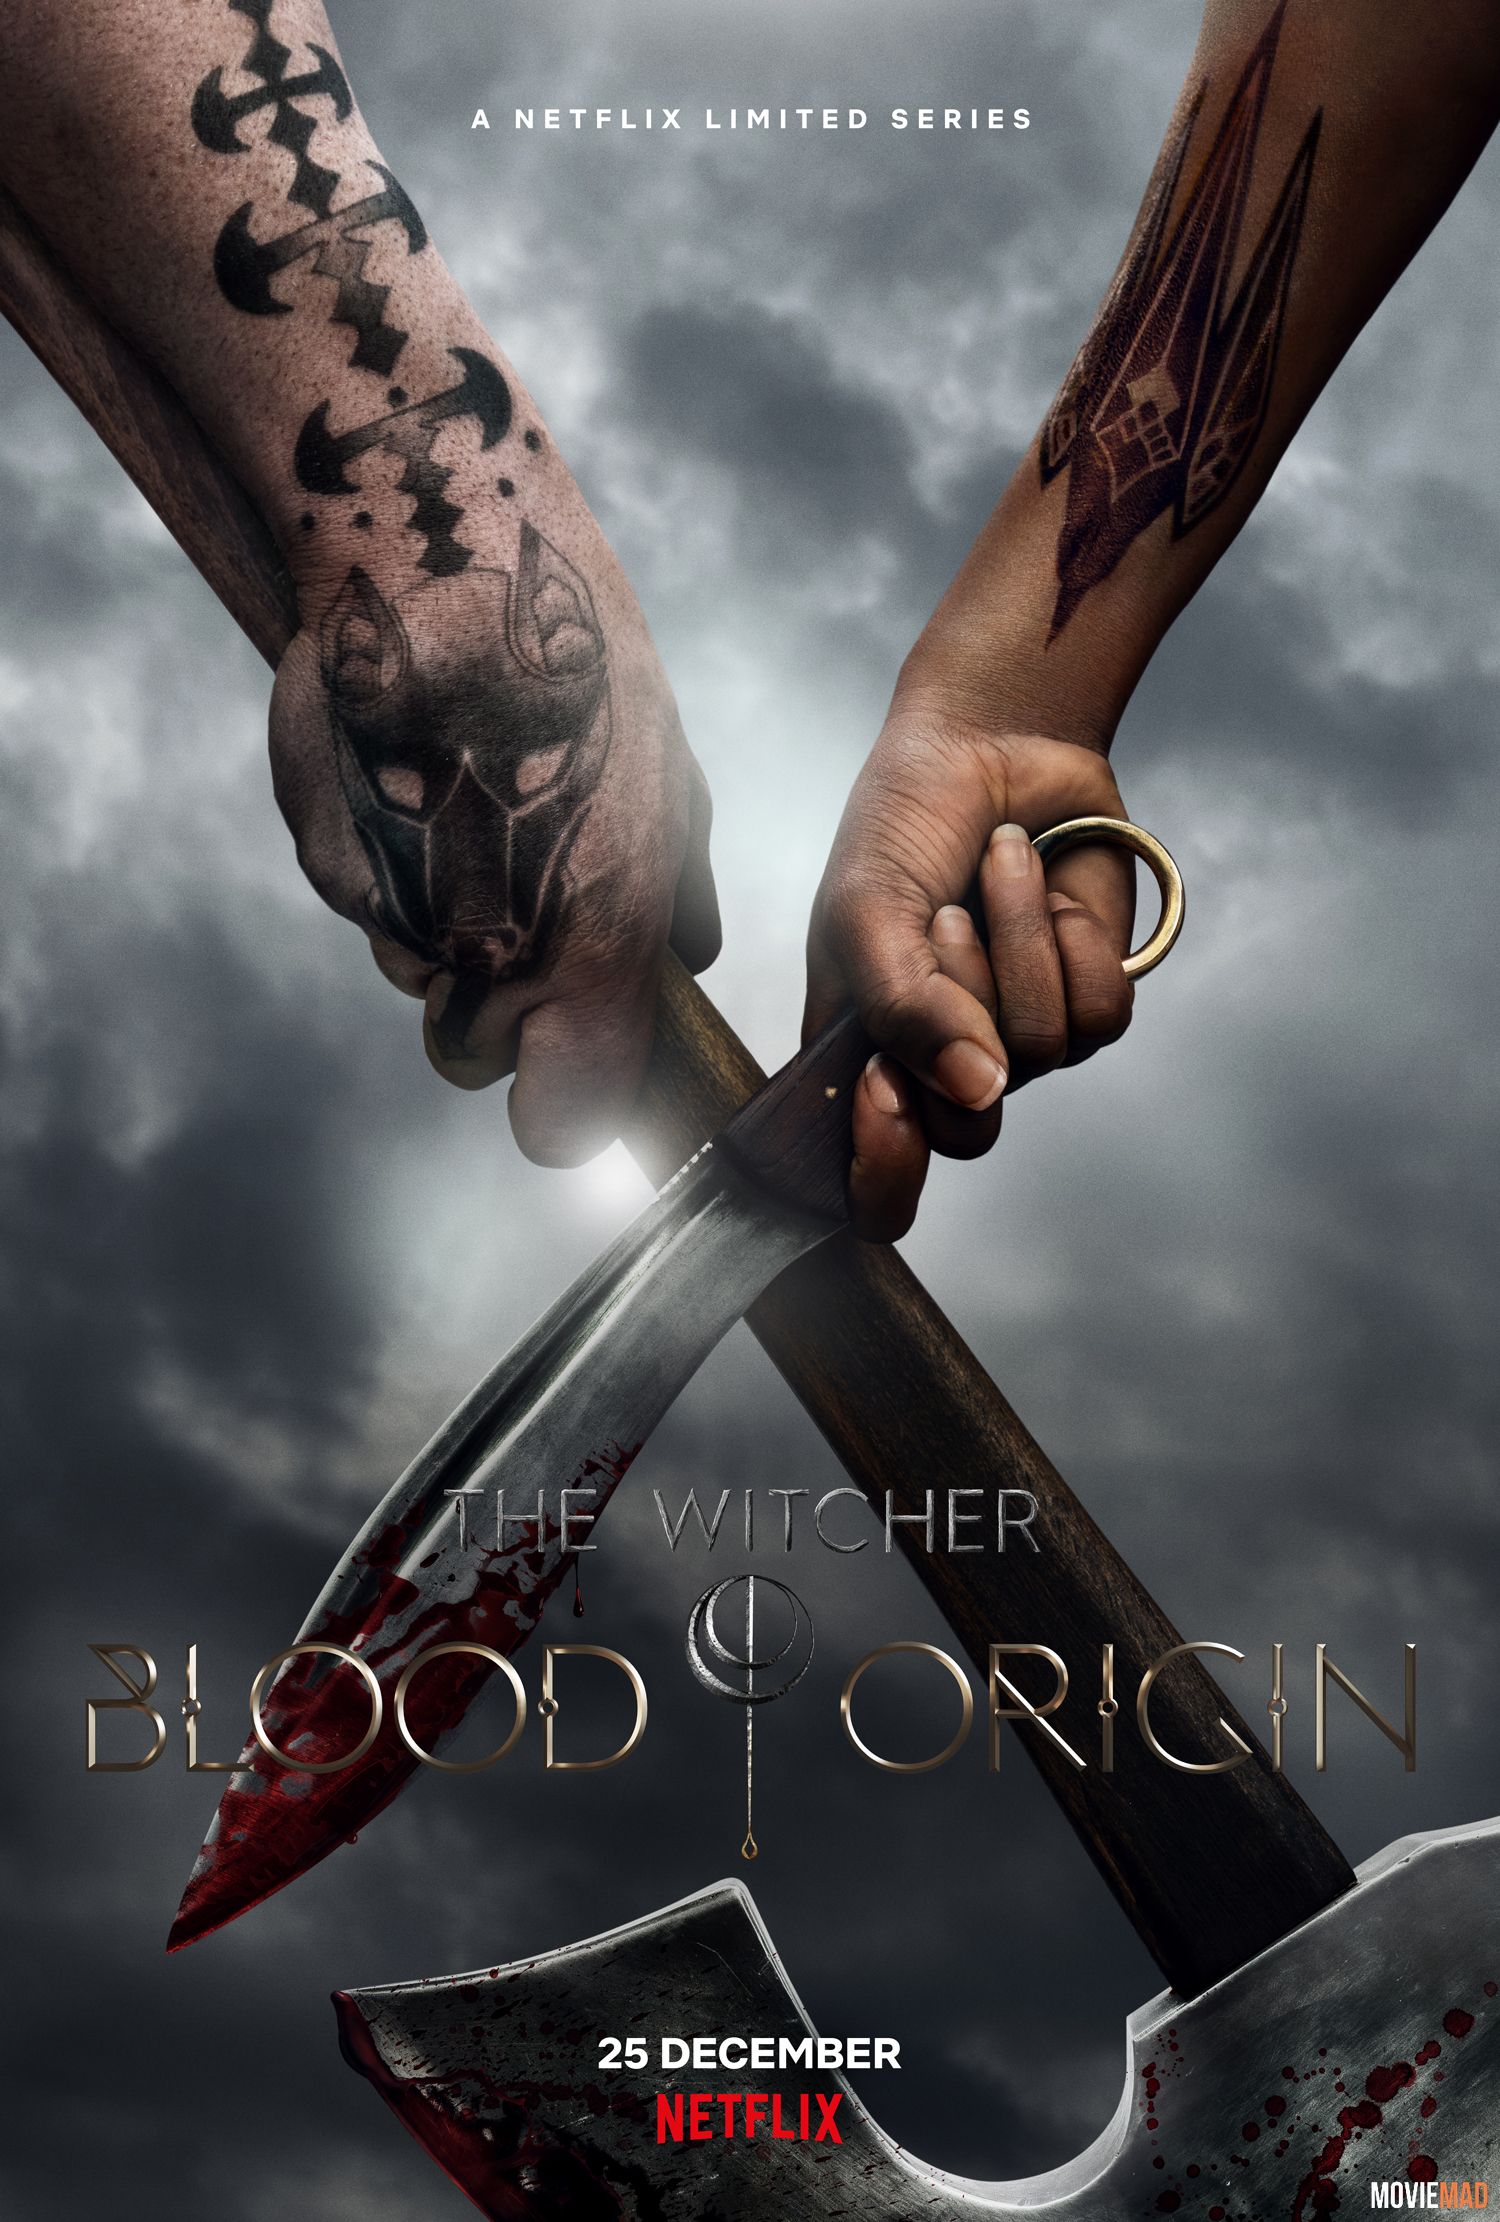 full moviesThe Witcher Blood Origin S01 (2022) Hindi Dubbed Complete Netflix Web Series HDRip 720p 480p